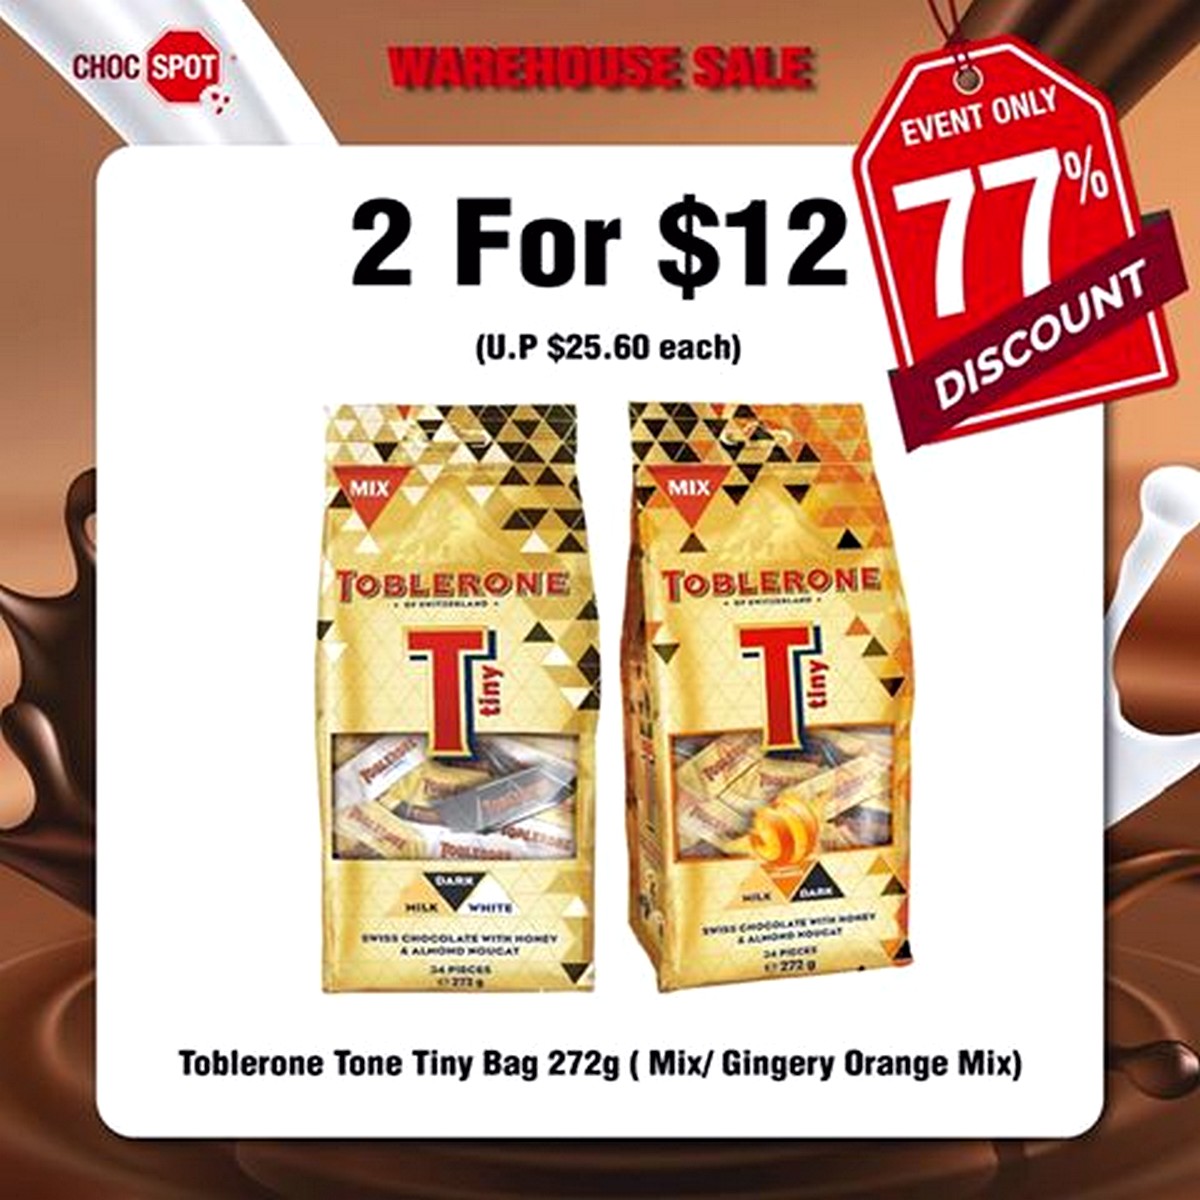 Choc-Spot-Warehouse-Sale-Highlights-001 24 Jul-2 Aug 2020: Choc Spot Warehouse Sale! Up to 80% off Chocolates, Sweets, Chips, Biscuits!